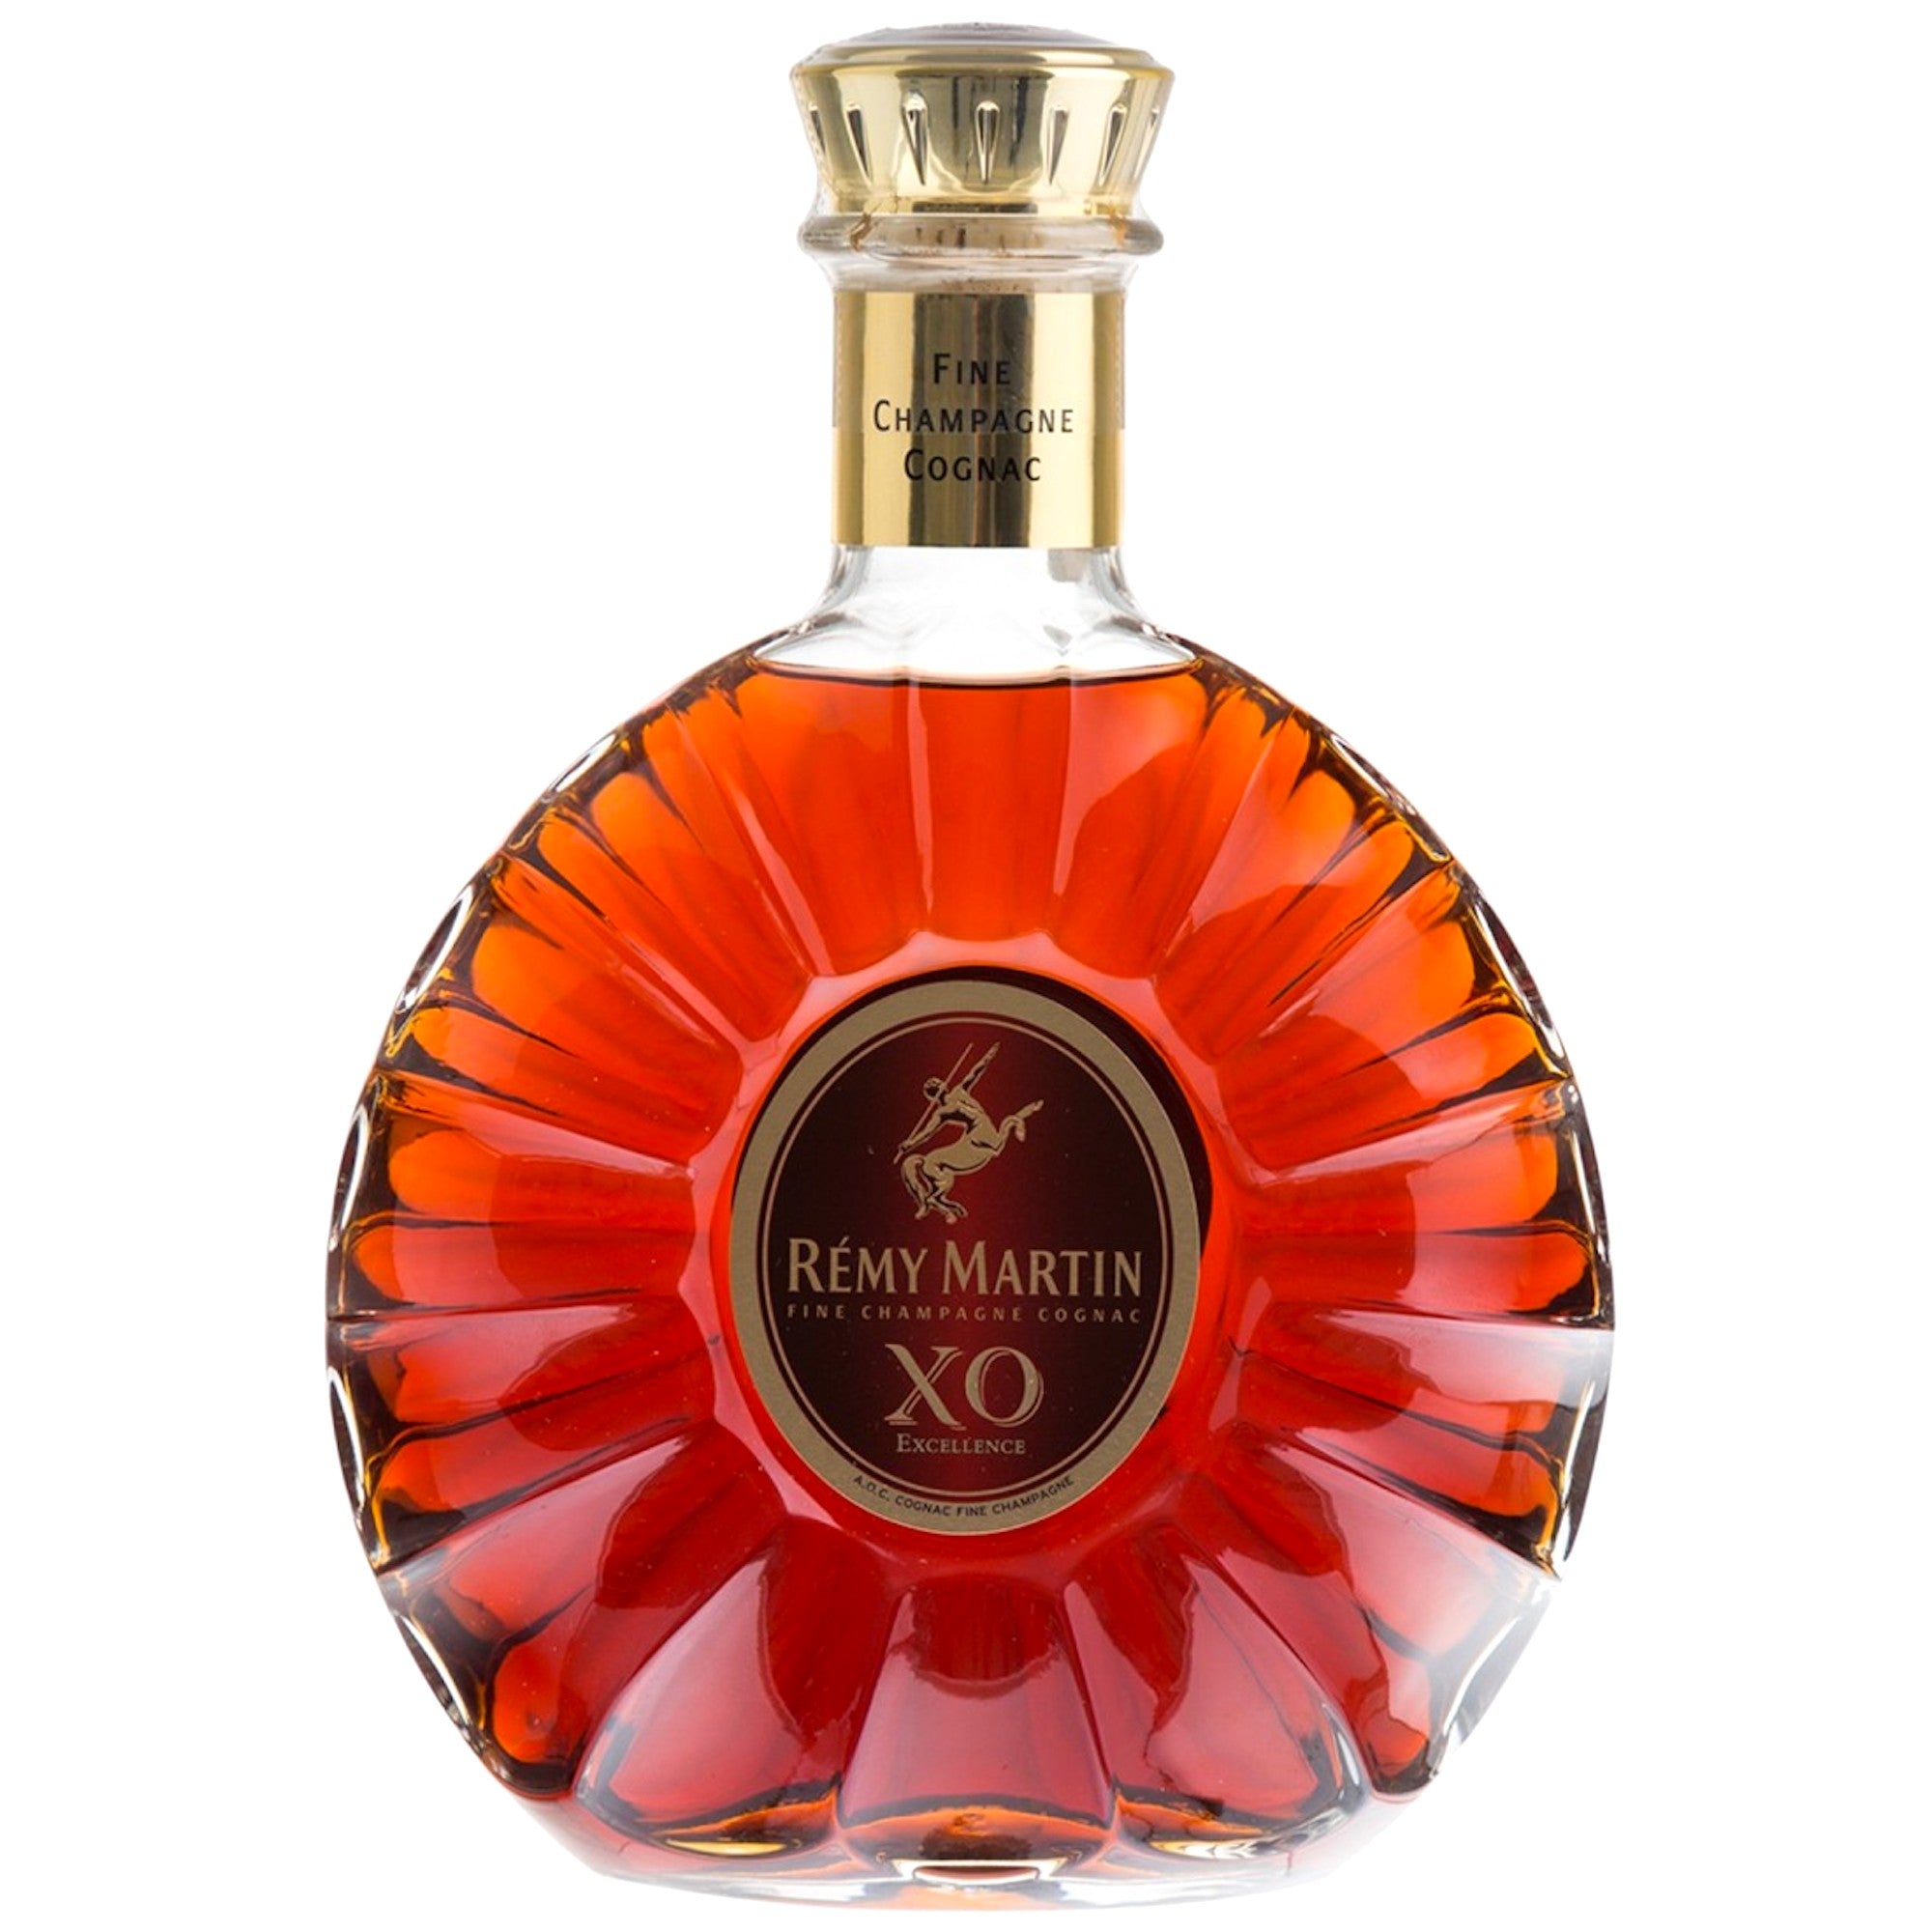 Hennessy X.O Extra Old Cognac 375ml